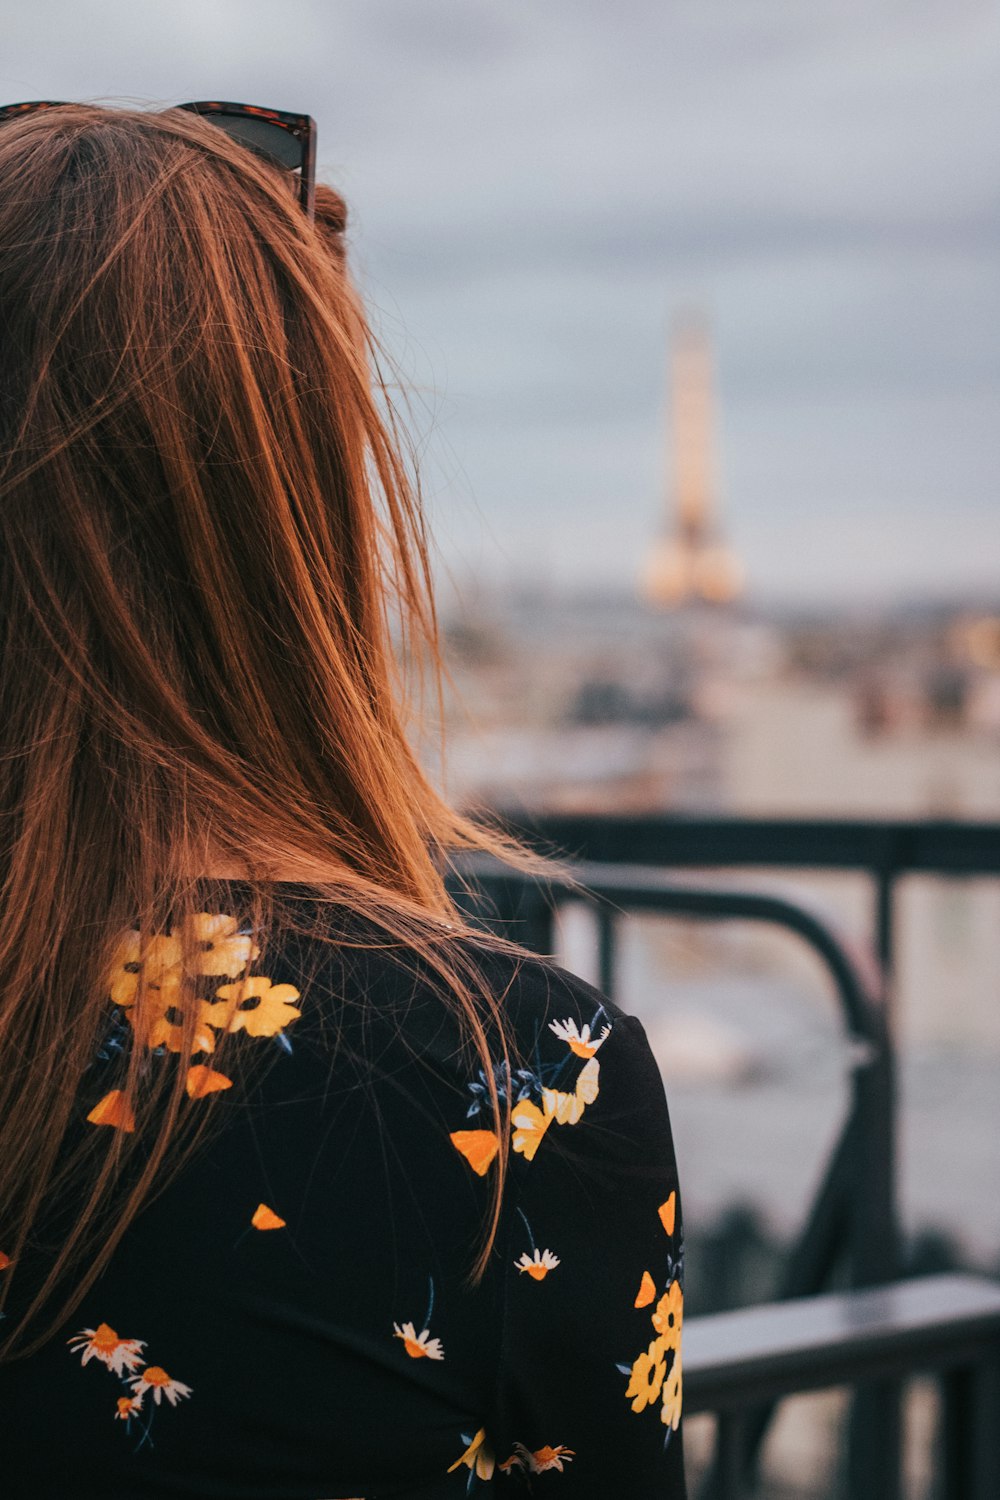 woman in black and yellow floral shirt standing near railings during daytime